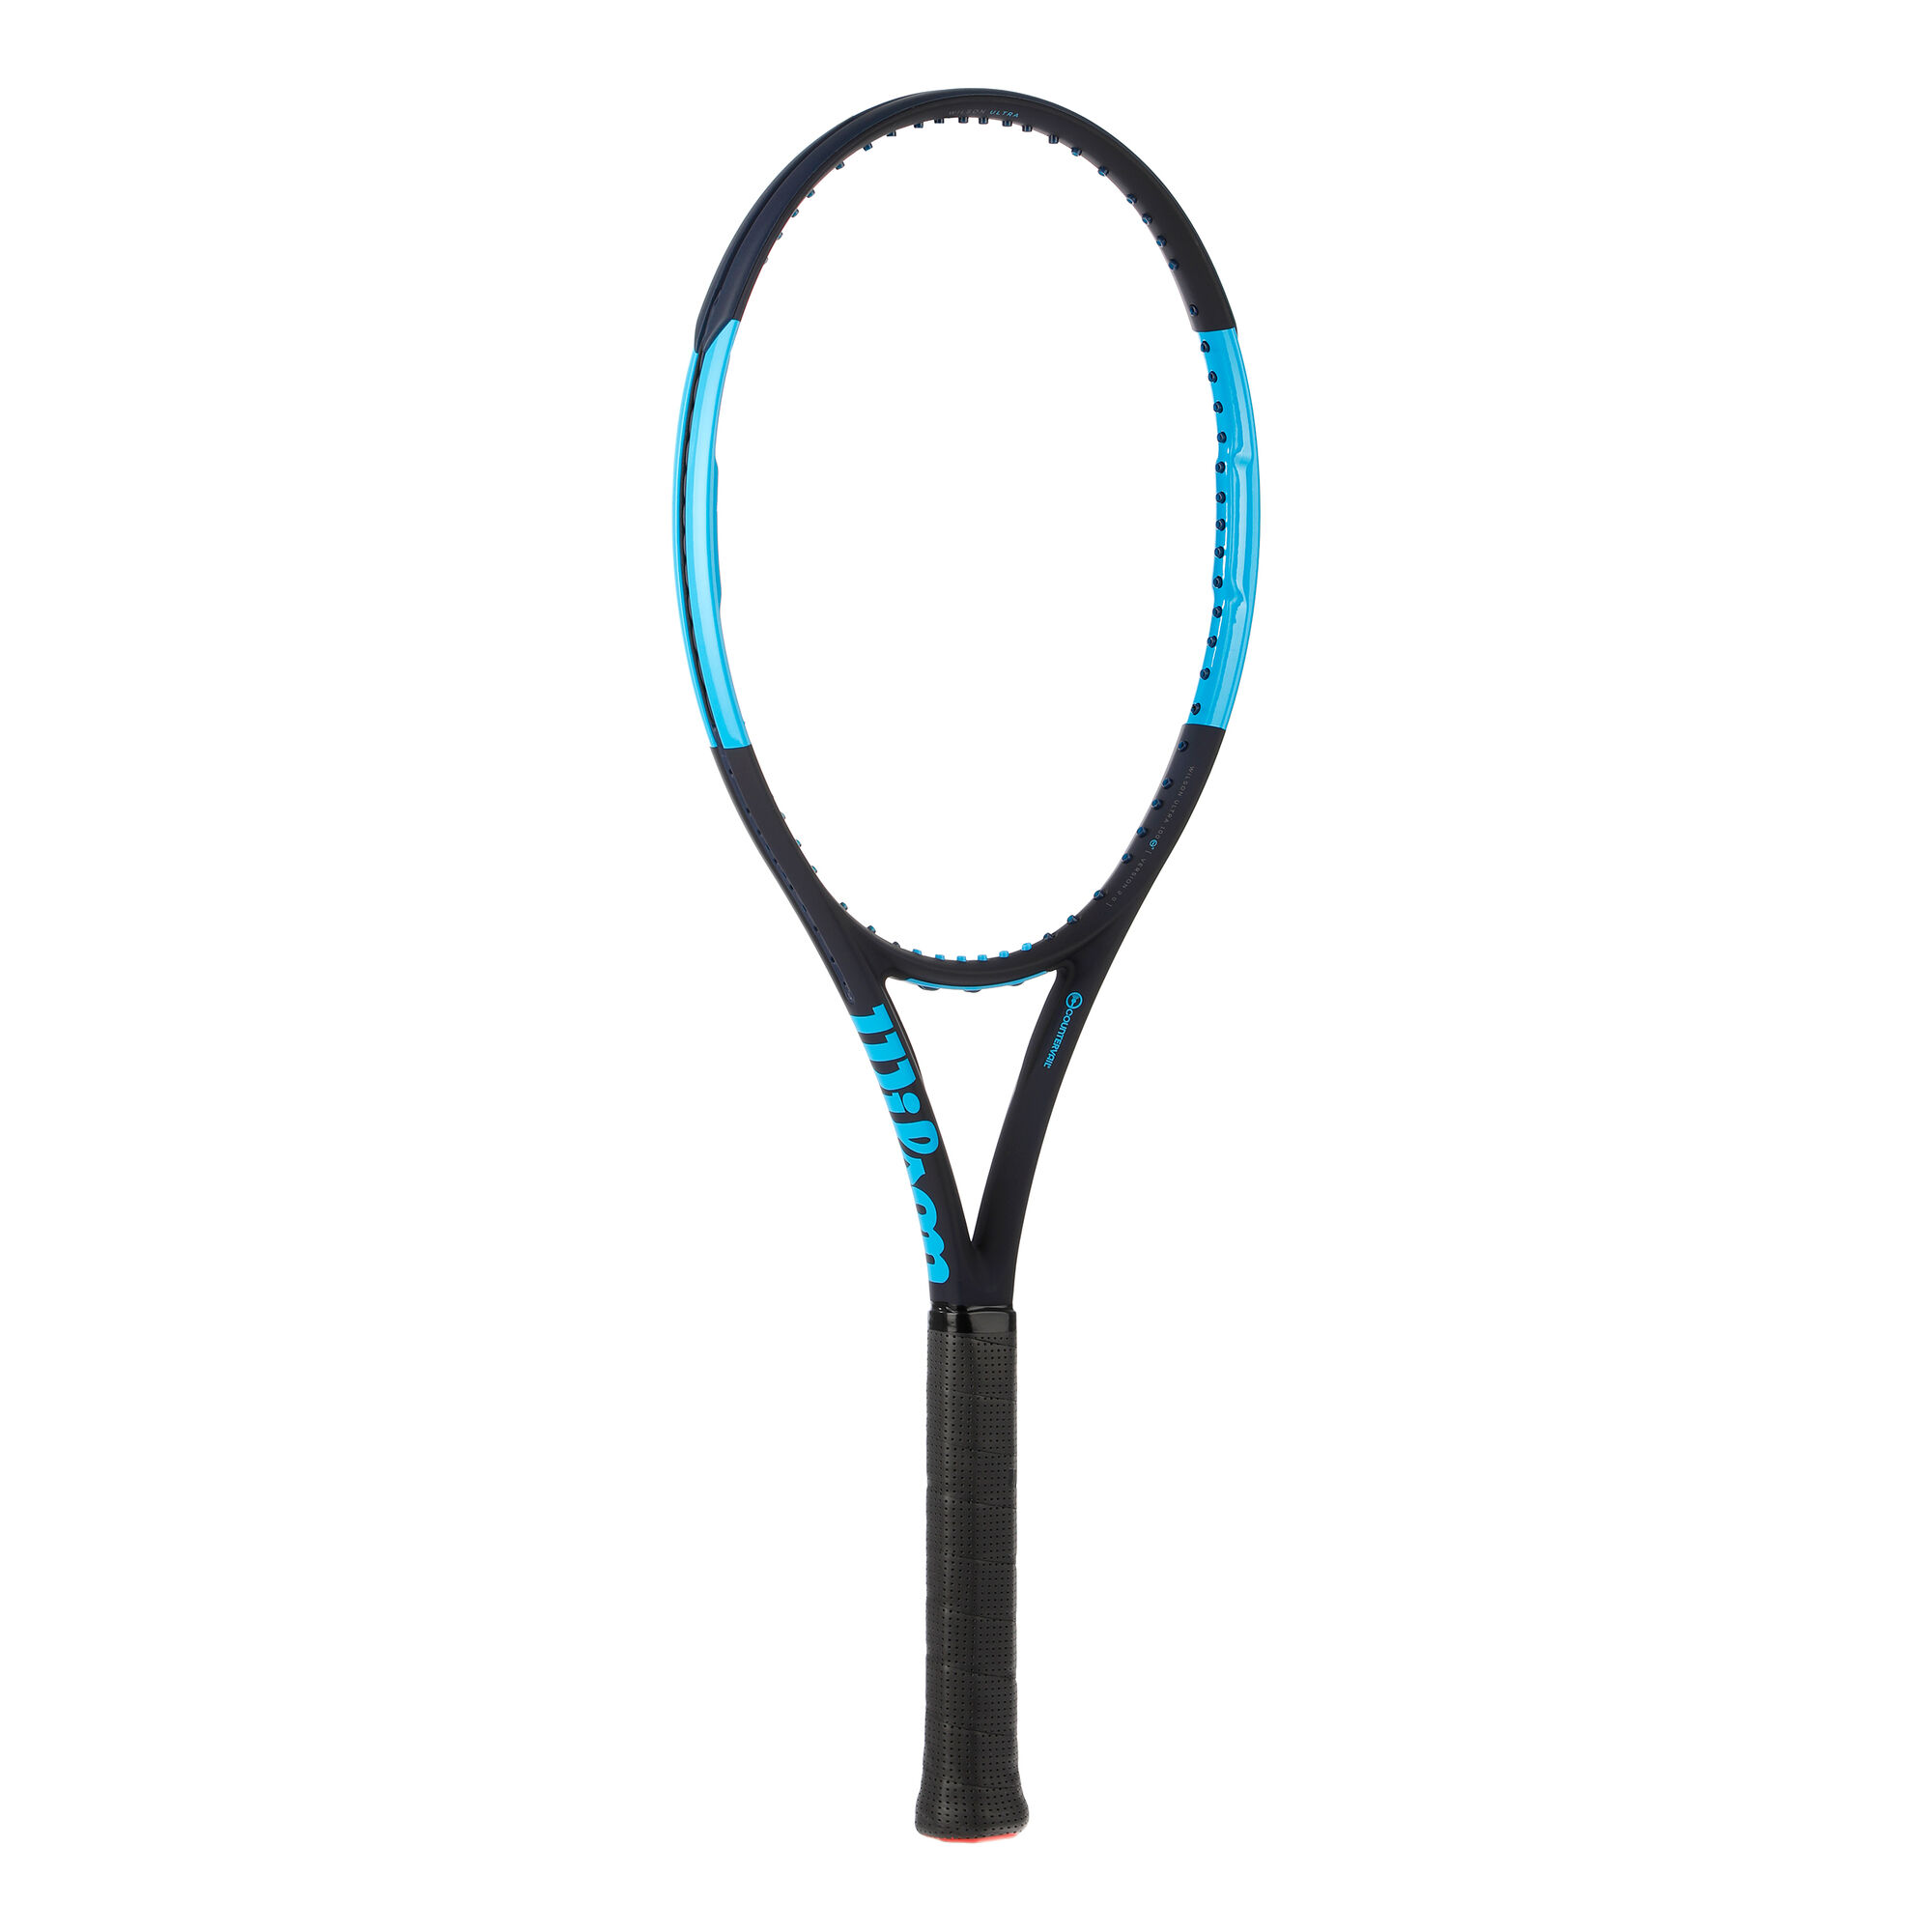 Onbeleefd mythologie Het hotel buy Wilson Ultra 100 Countervail Tour Racket (Special Edition) online |  Tennis-Point